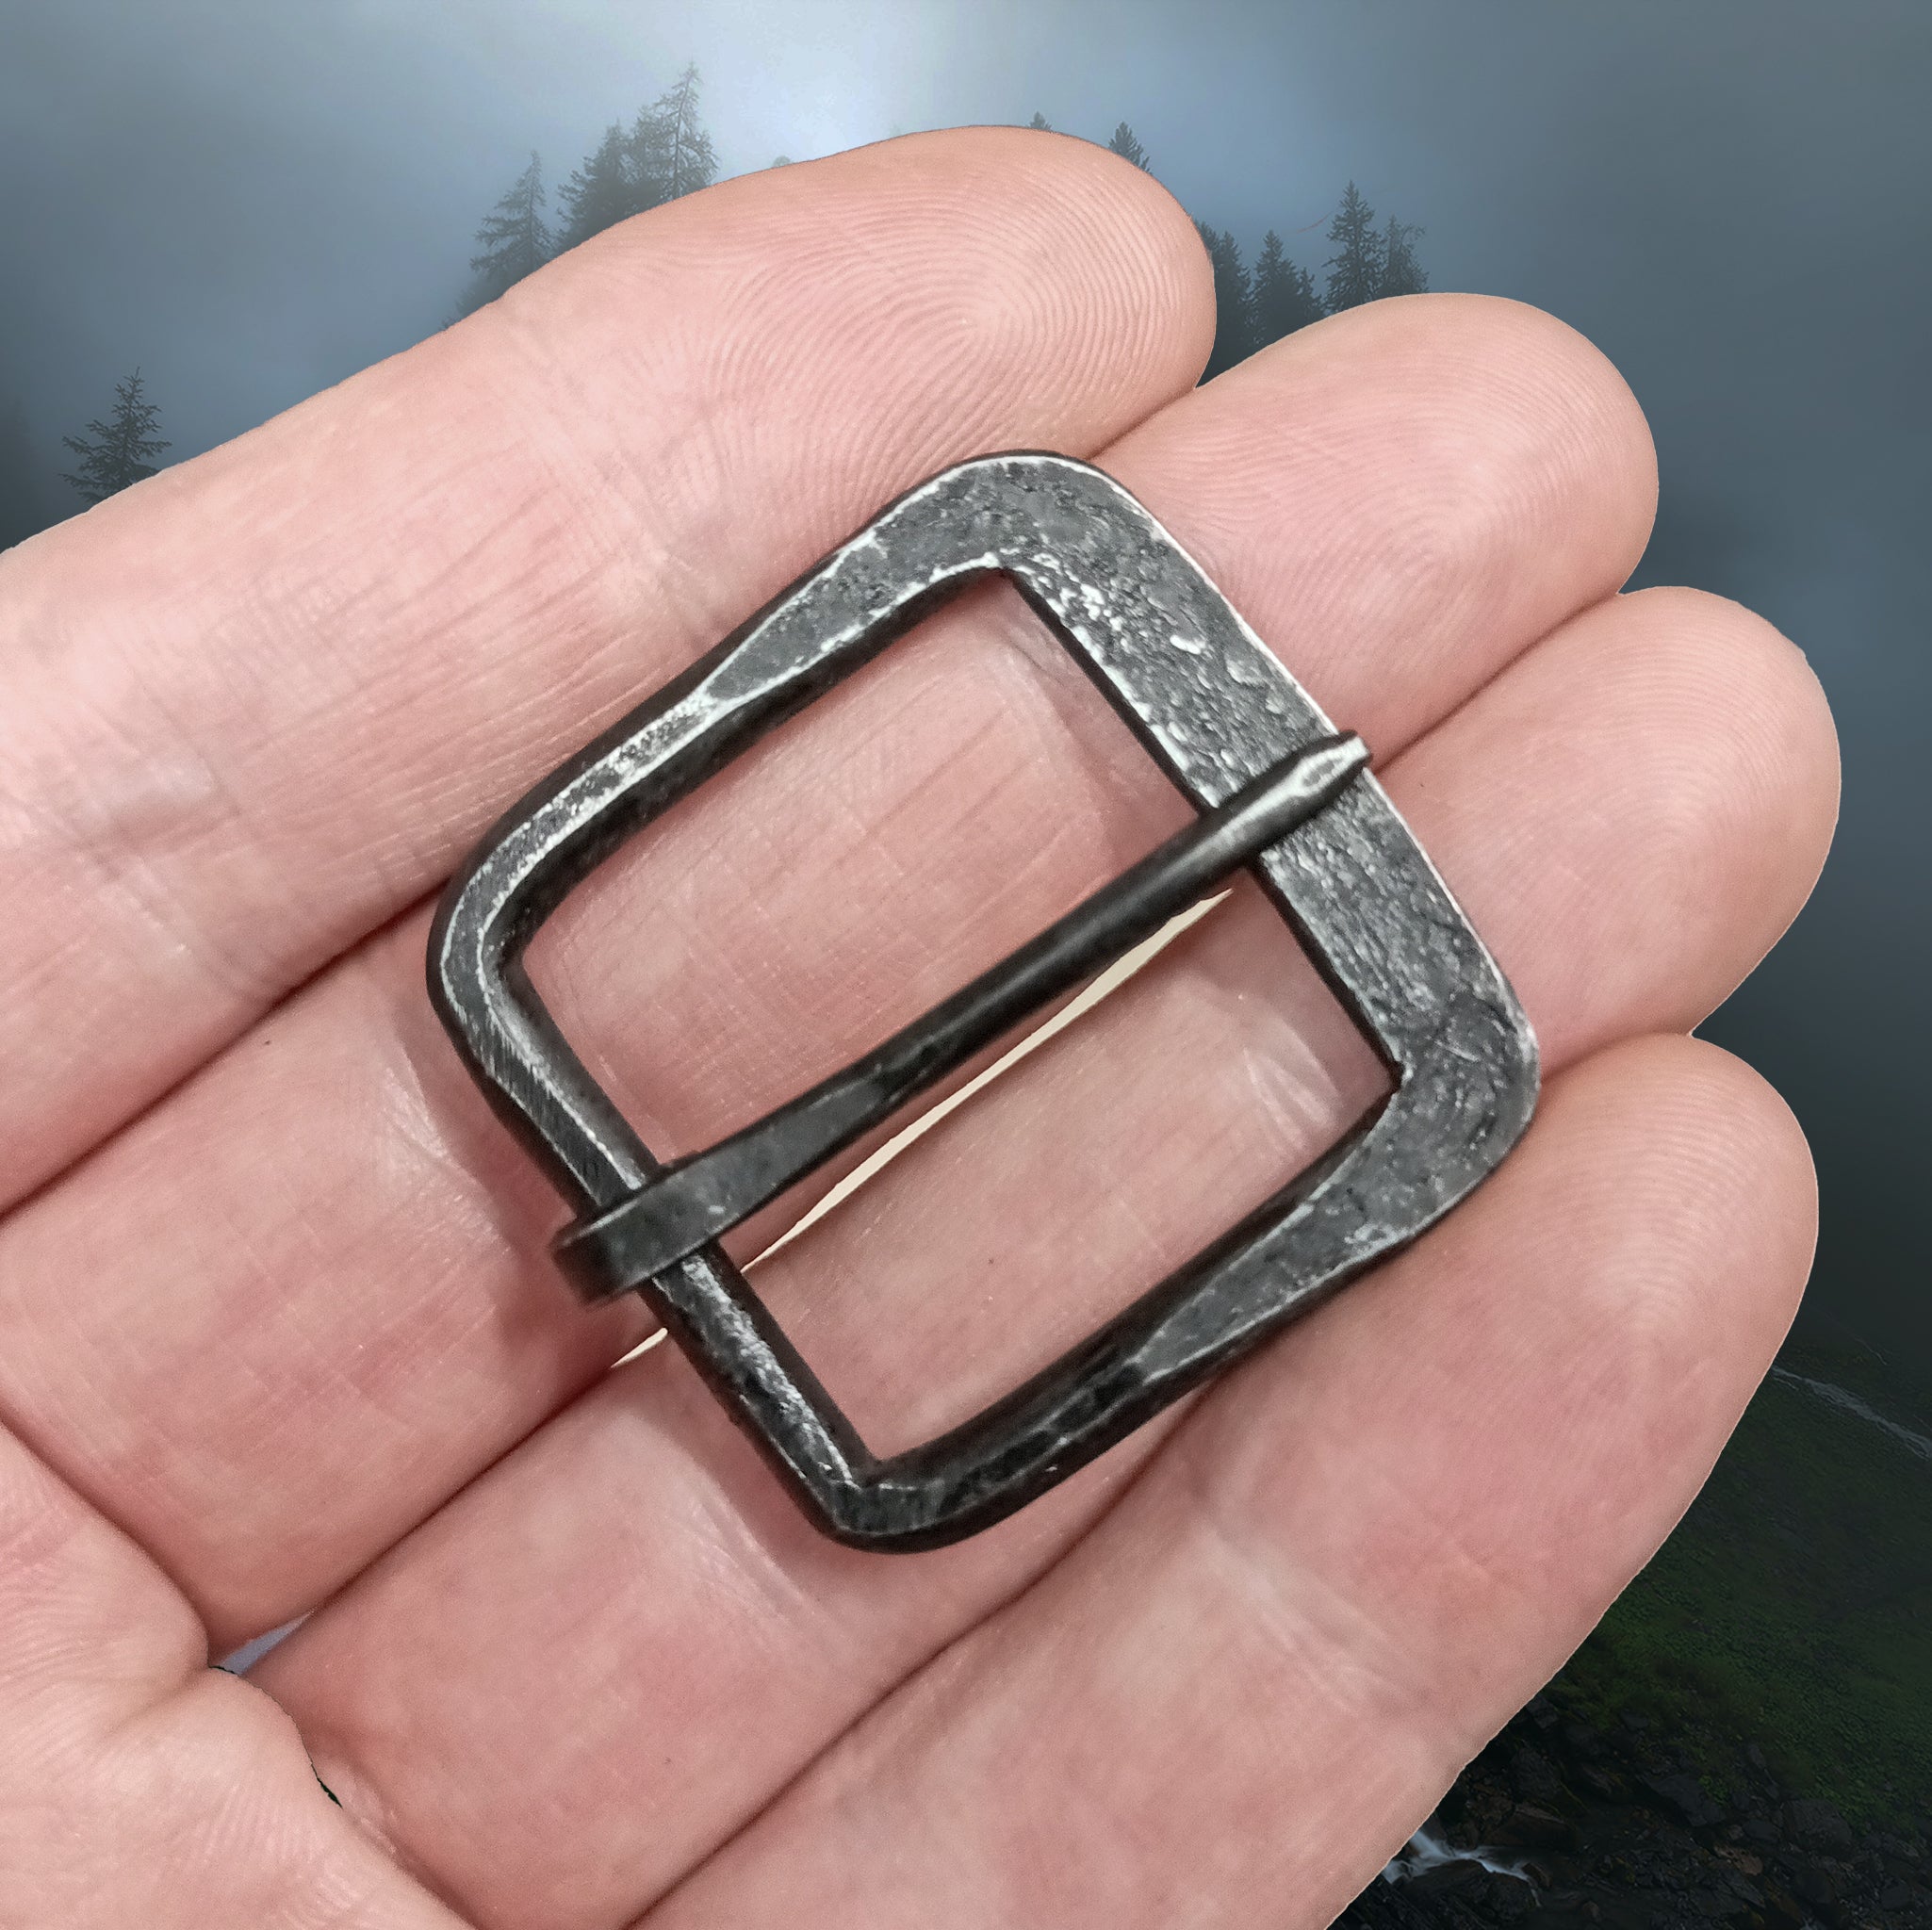 Hand-Forged Iron Viking / Medieval Buckle - 25mm (1 inch)